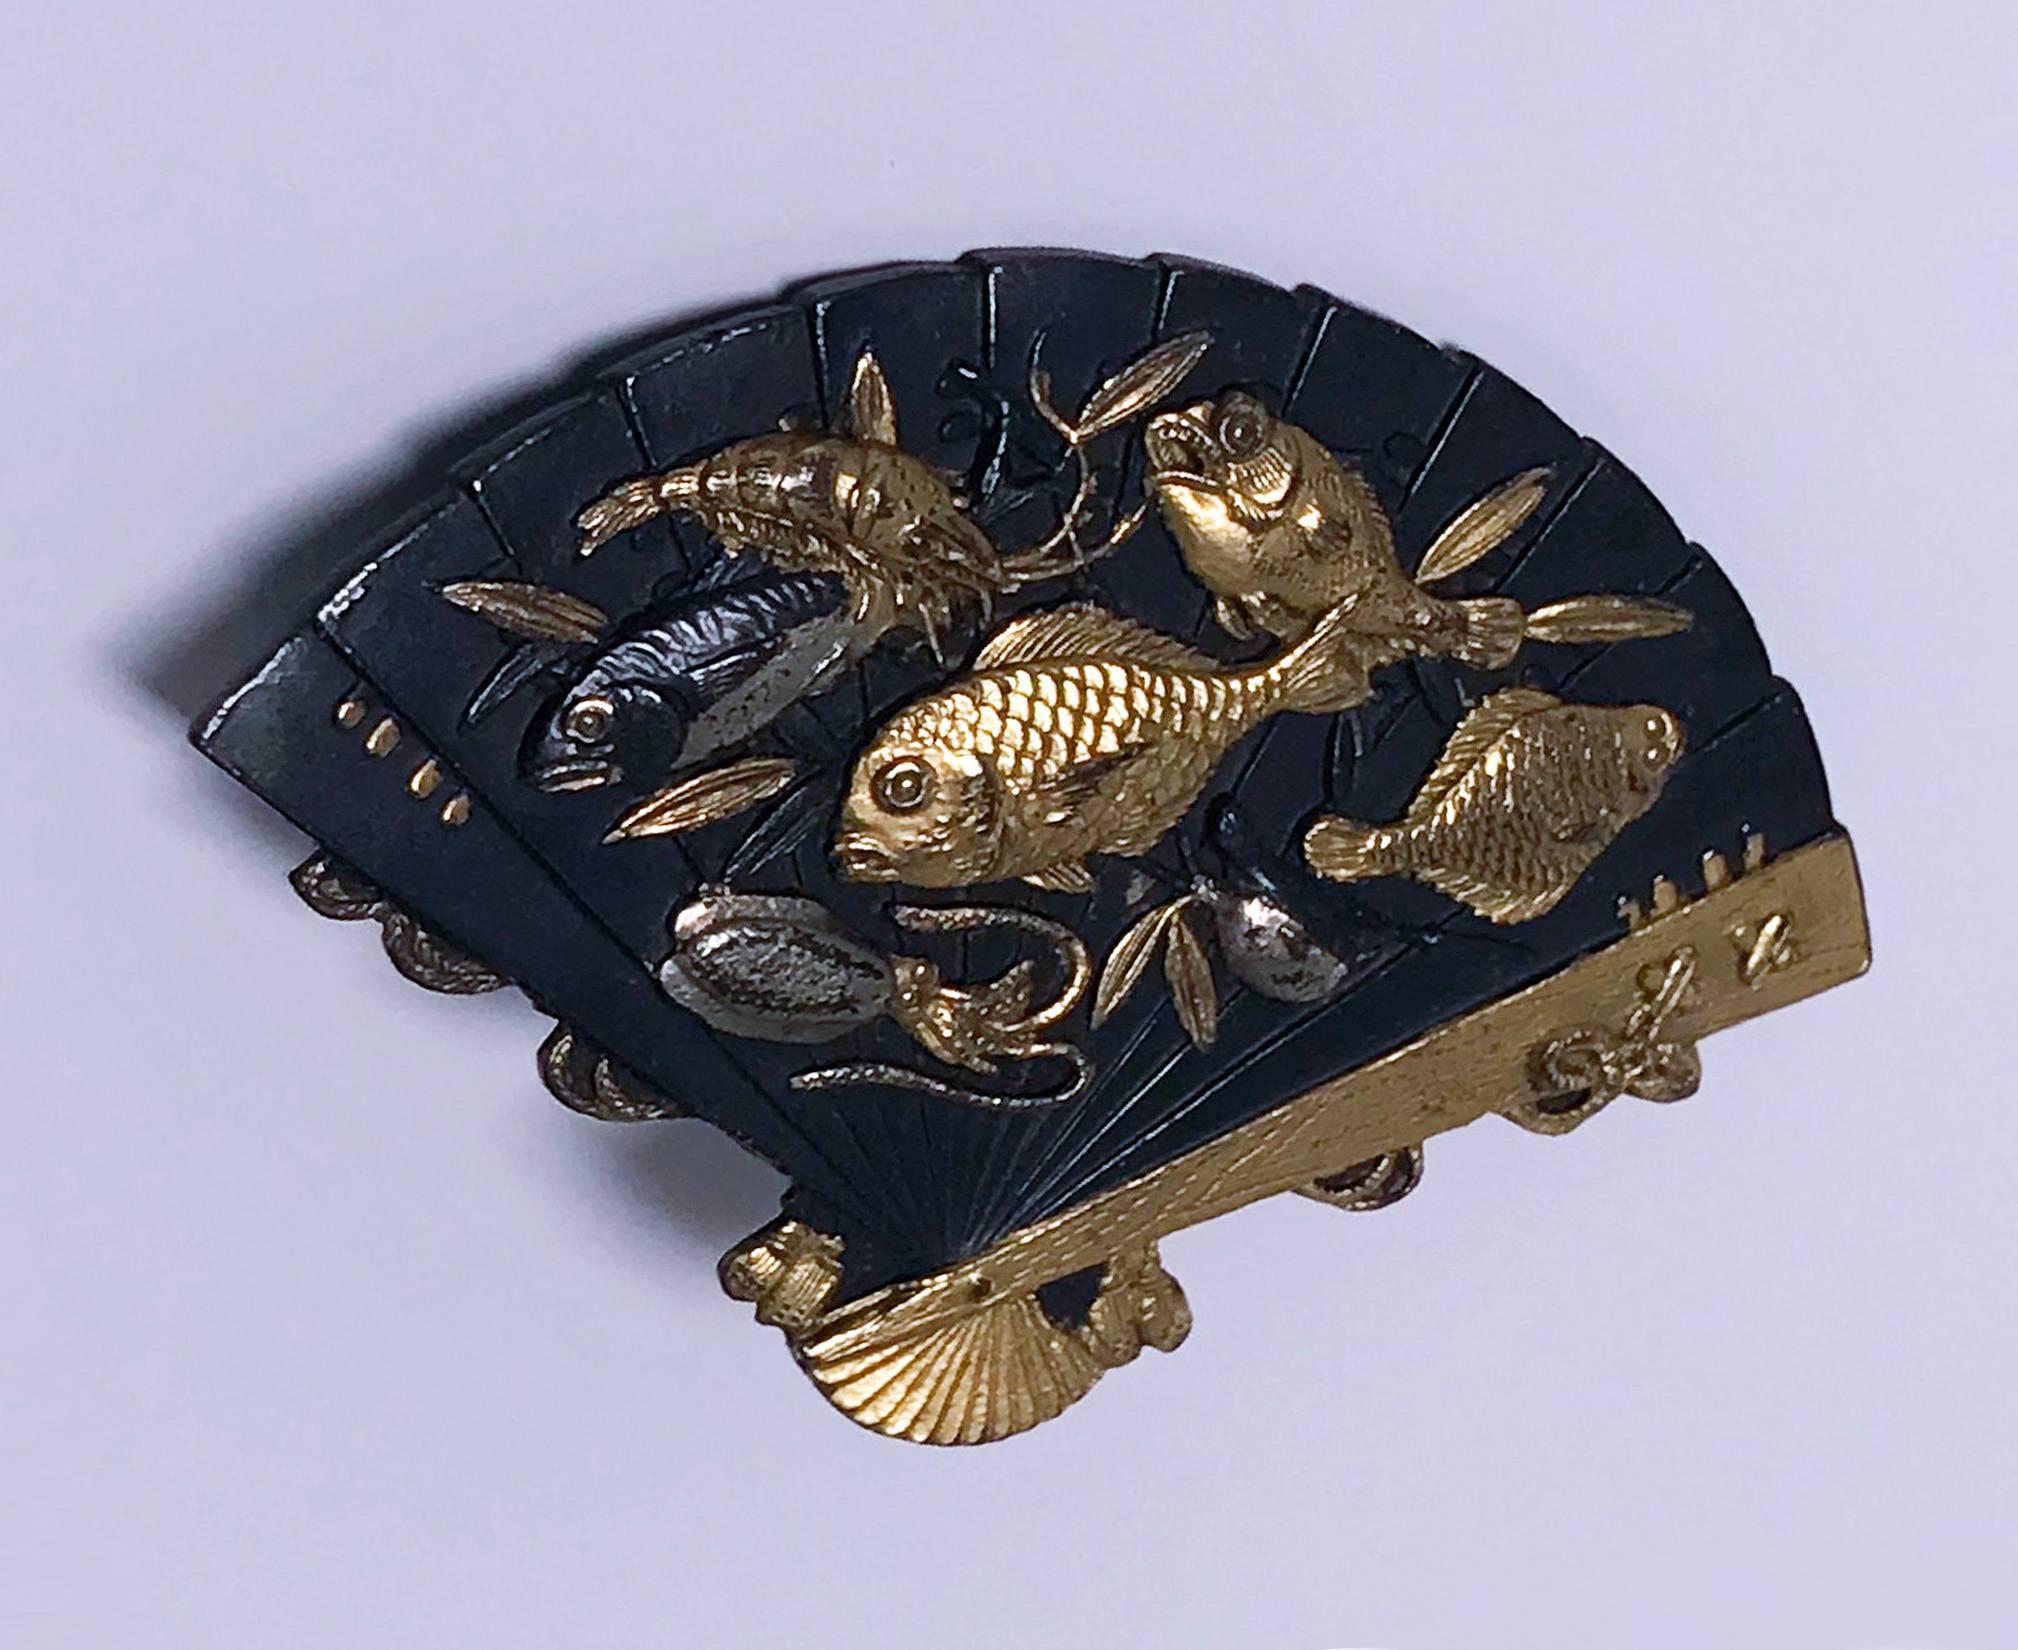 Antique 19th century Japanese Shakudo Fan Brooch, C.1880. The brooch depicting swimming fish inlaid with contrasting gold and silver on blackened copper, framed by fan's decorations. The miniature details of fish, branches and flowers show highly